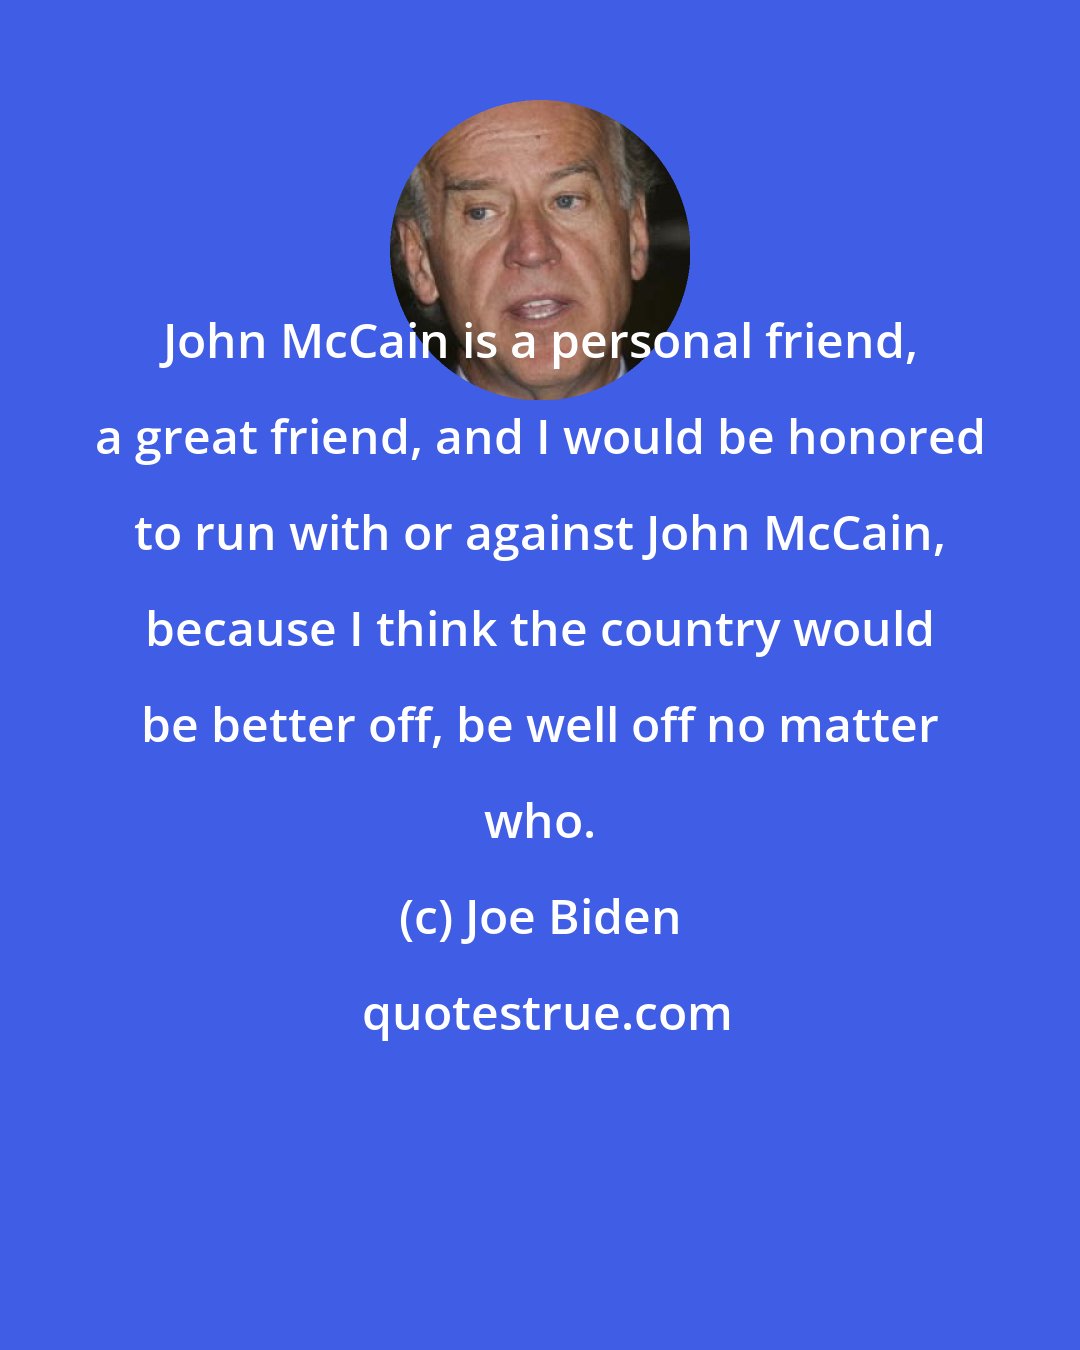 Joe Biden: John McCain is a personal friend, a great friend, and I would be honored to run with or against John McCain, because I think the country would be better off, be well off no matter who.